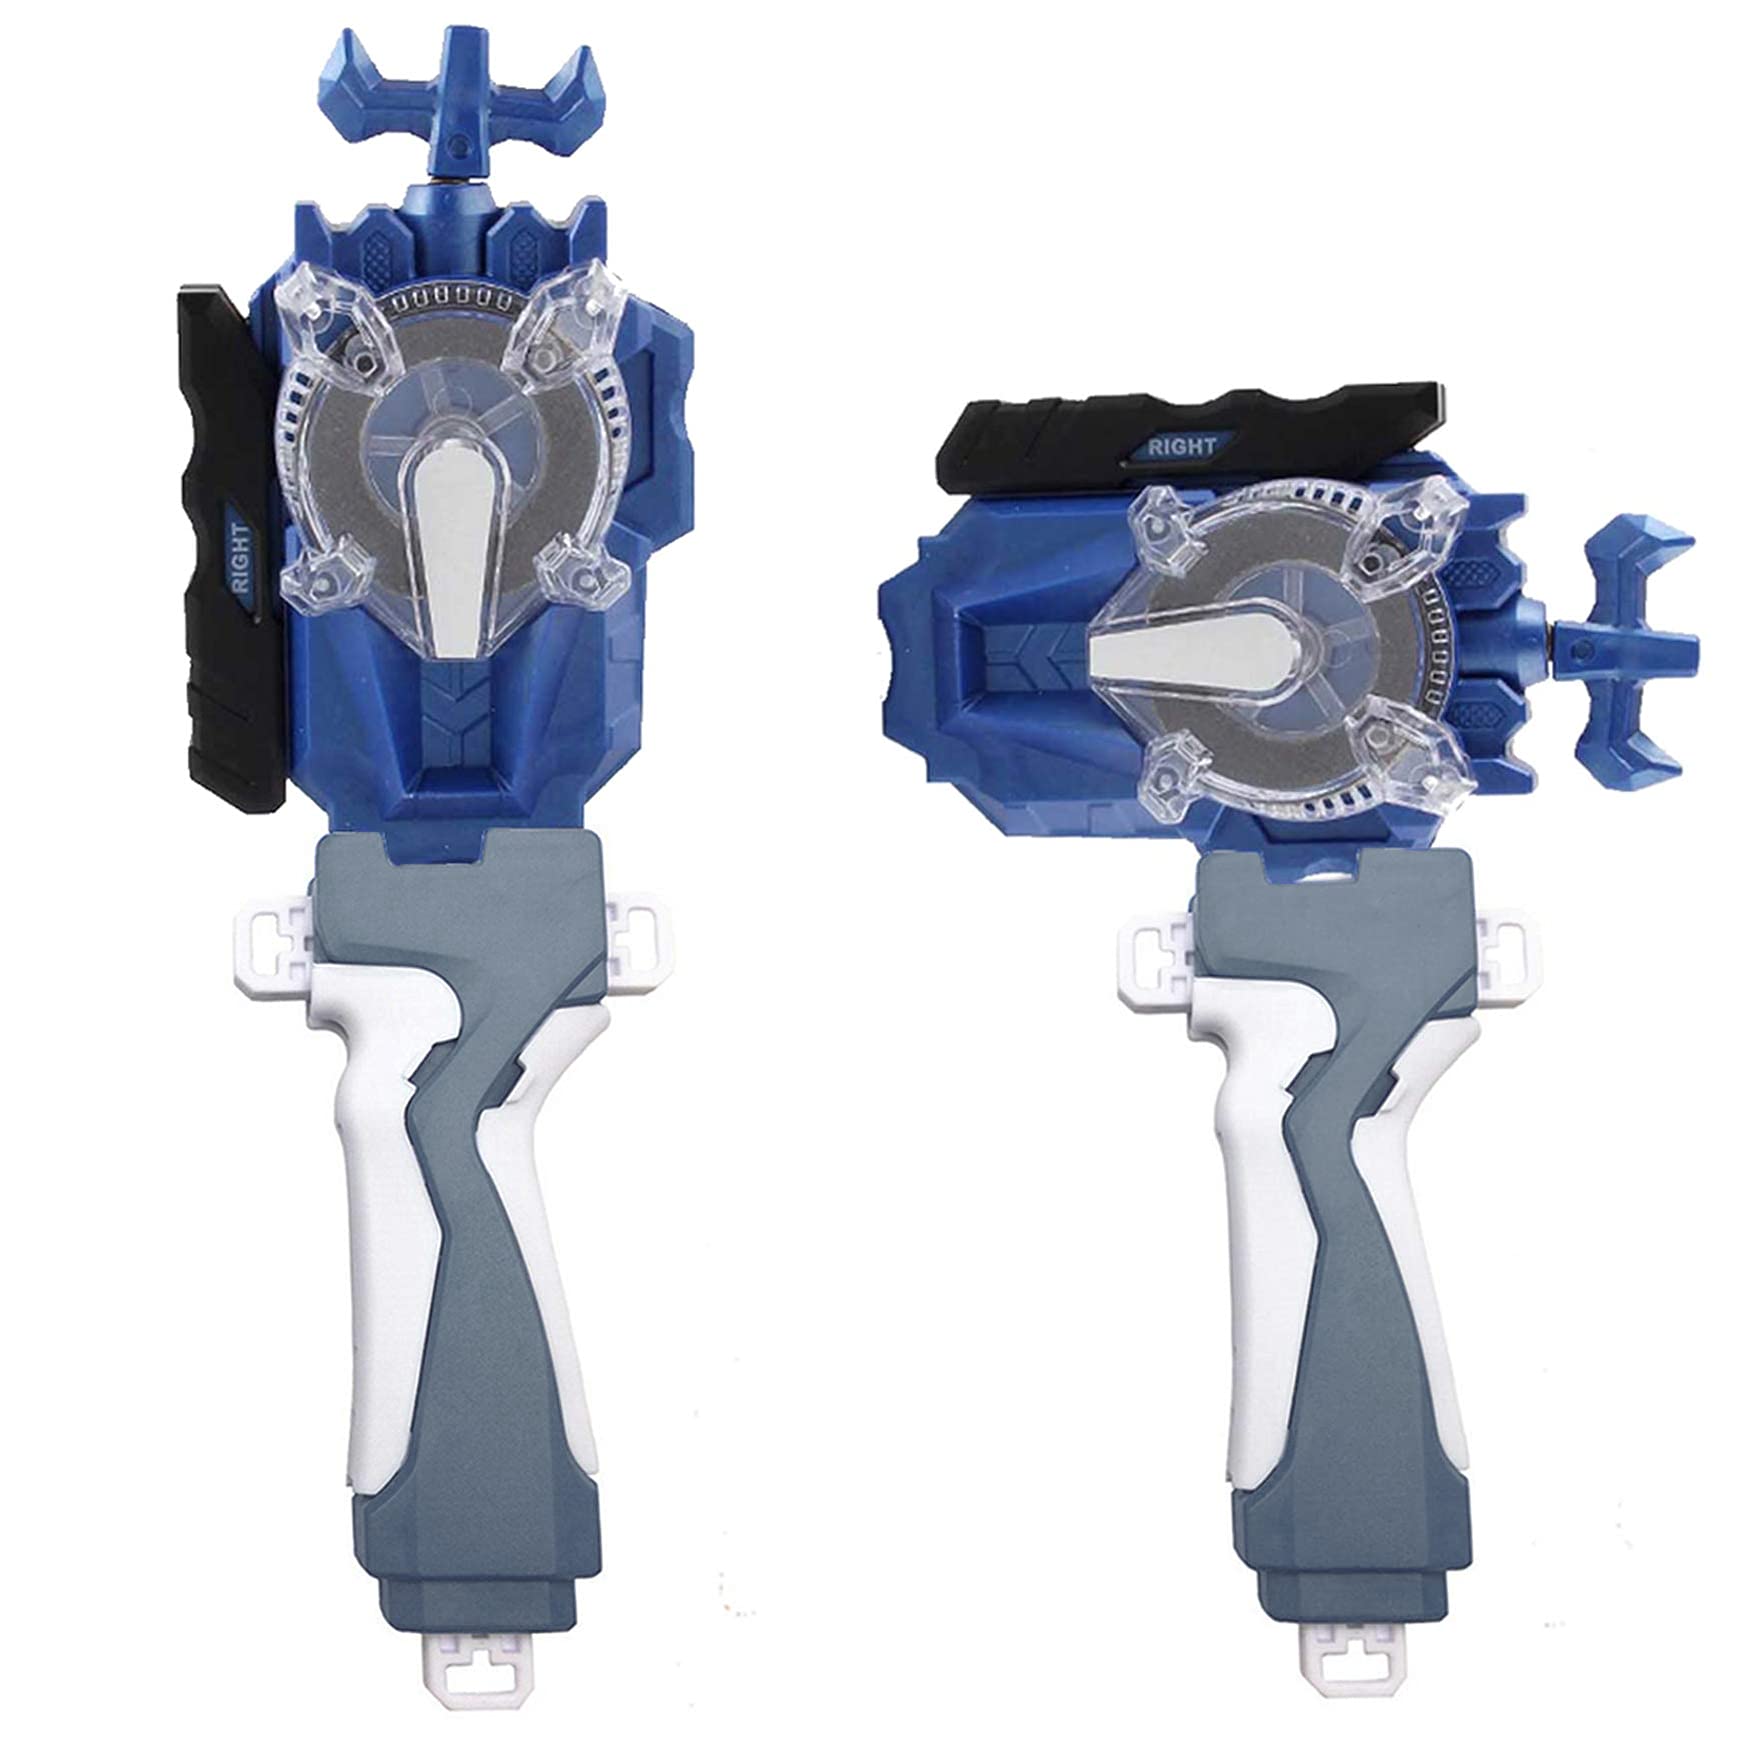 Konikiwa Battling Sparking String Launcher, Brave Valkyrie Top Burst Launcher Set, Left and Right Spin String Launcher Grip Compatible with All Bey Burst Series - Blue